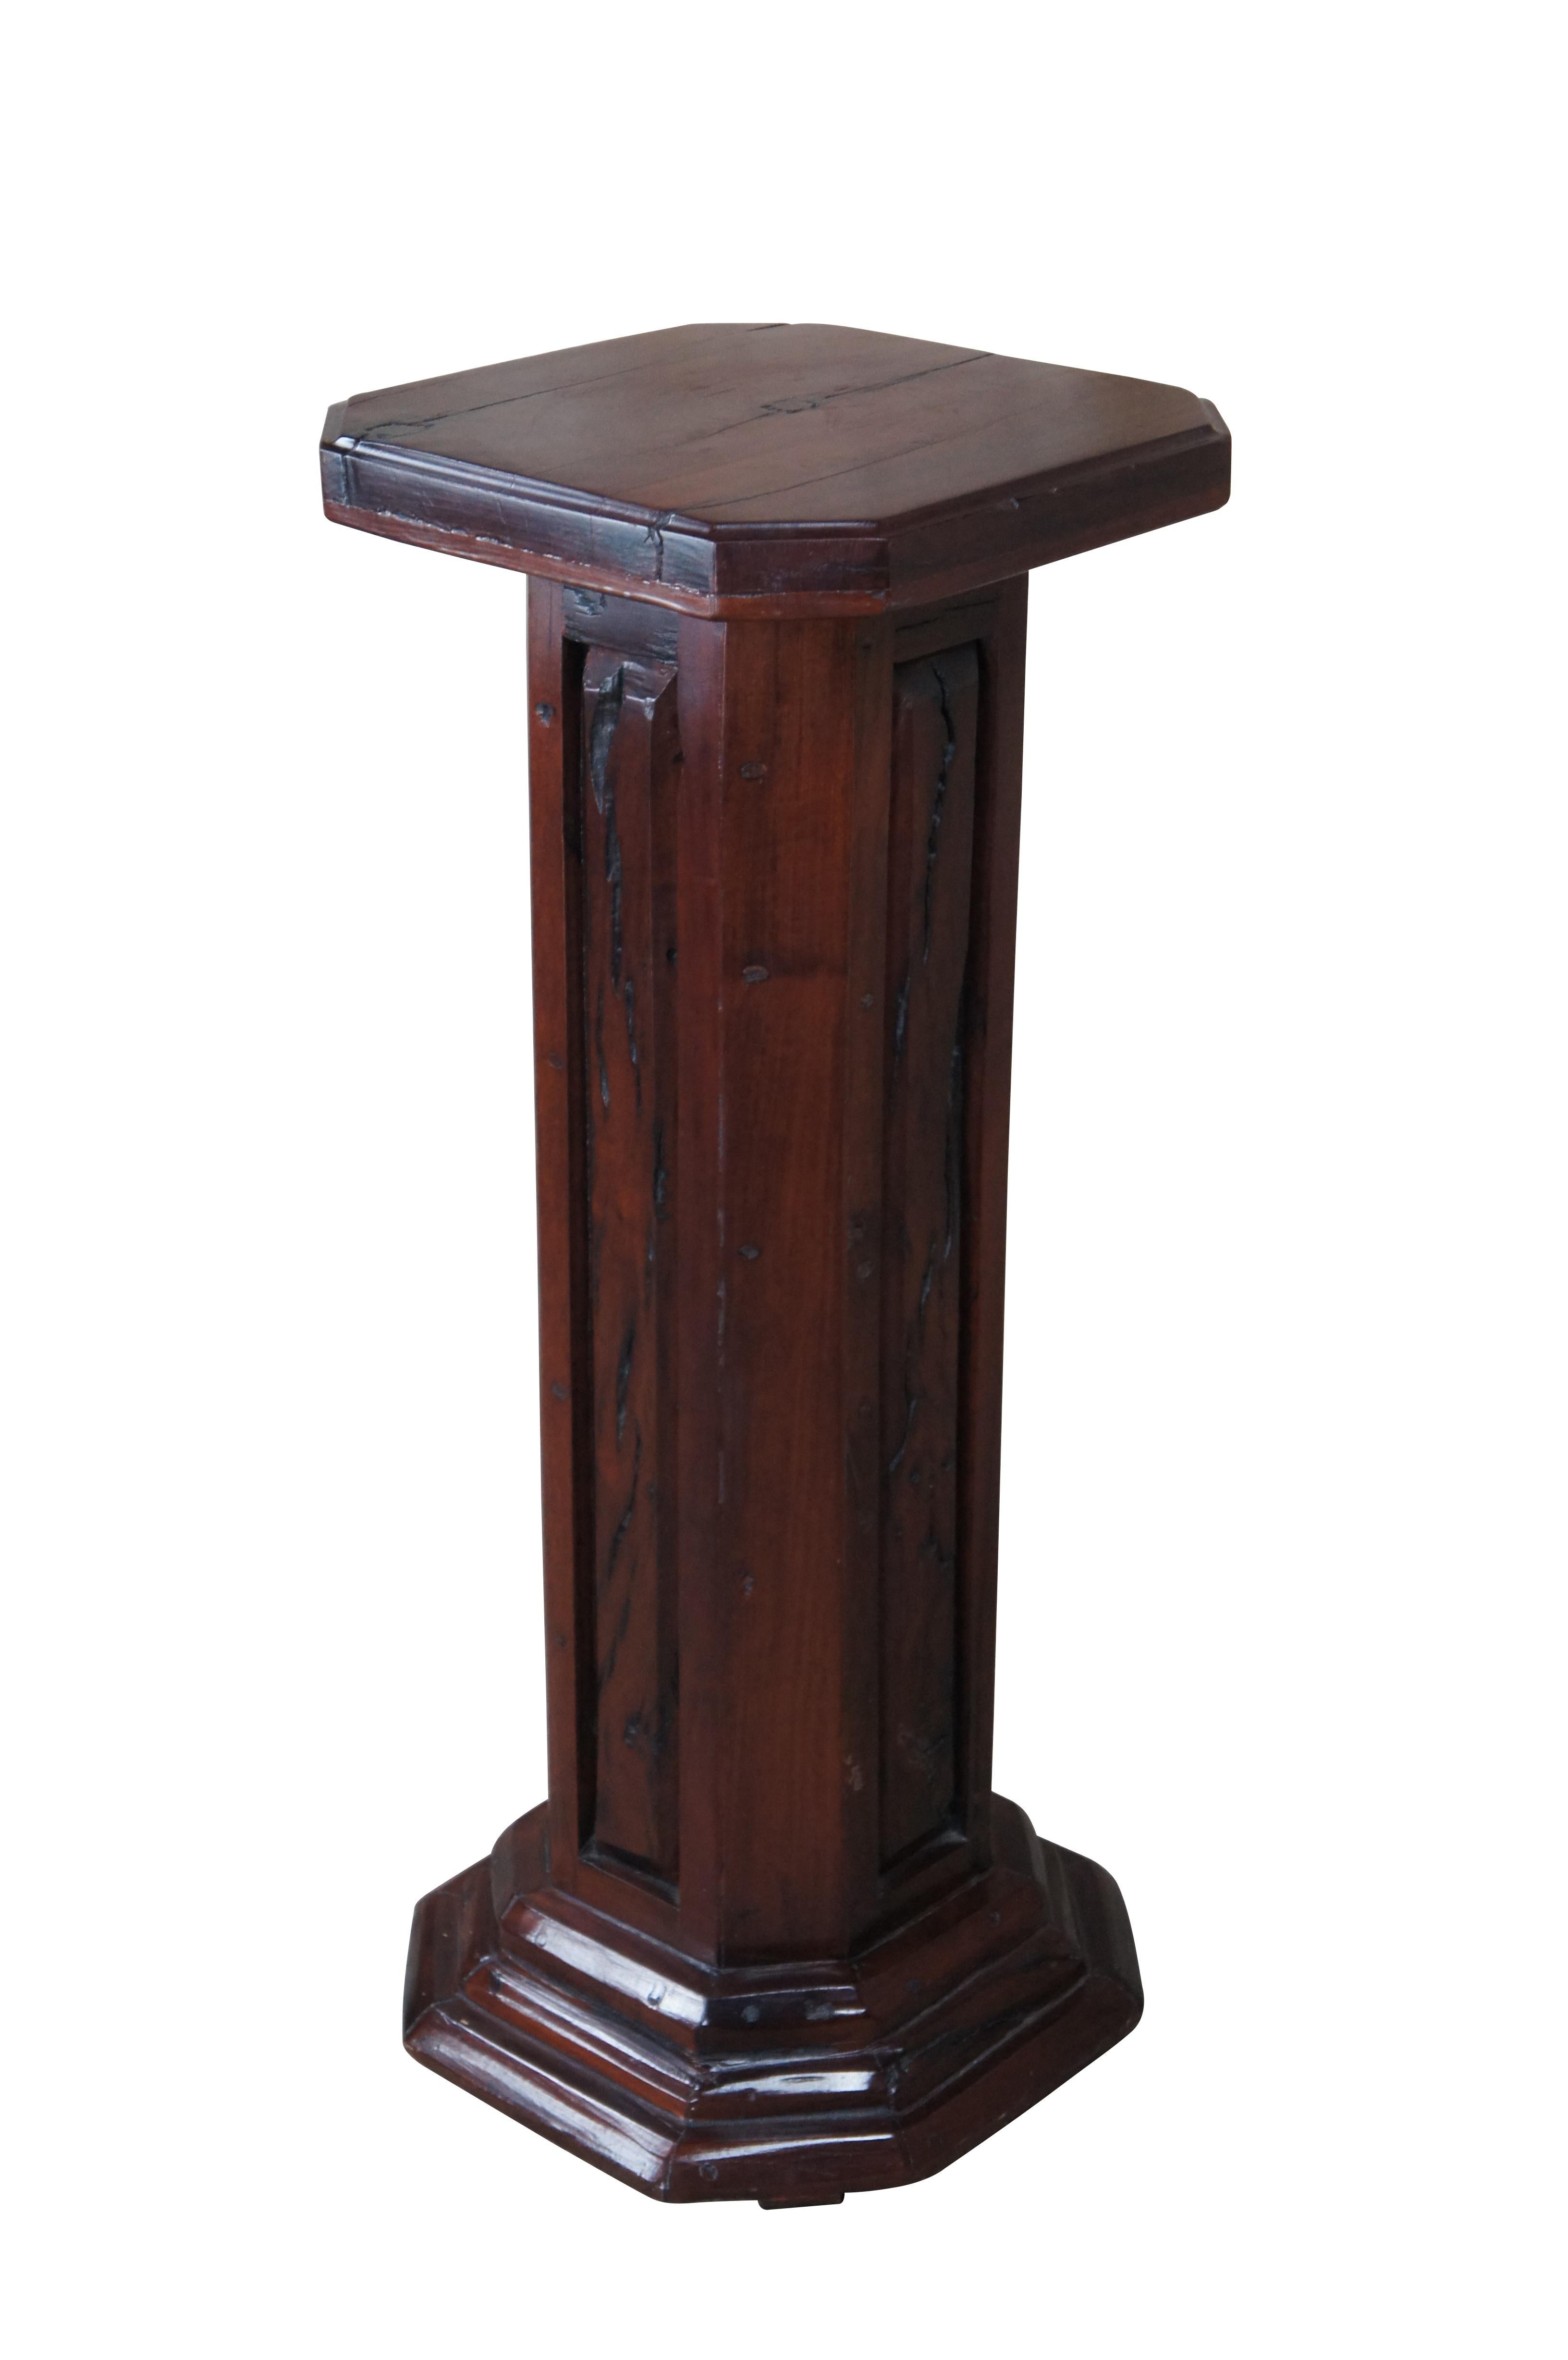 Traditional hardwood sculpture pedestal or plant stand.  Features an eight sided design with paneled support.  Marked along underside.

Dimensions:
13